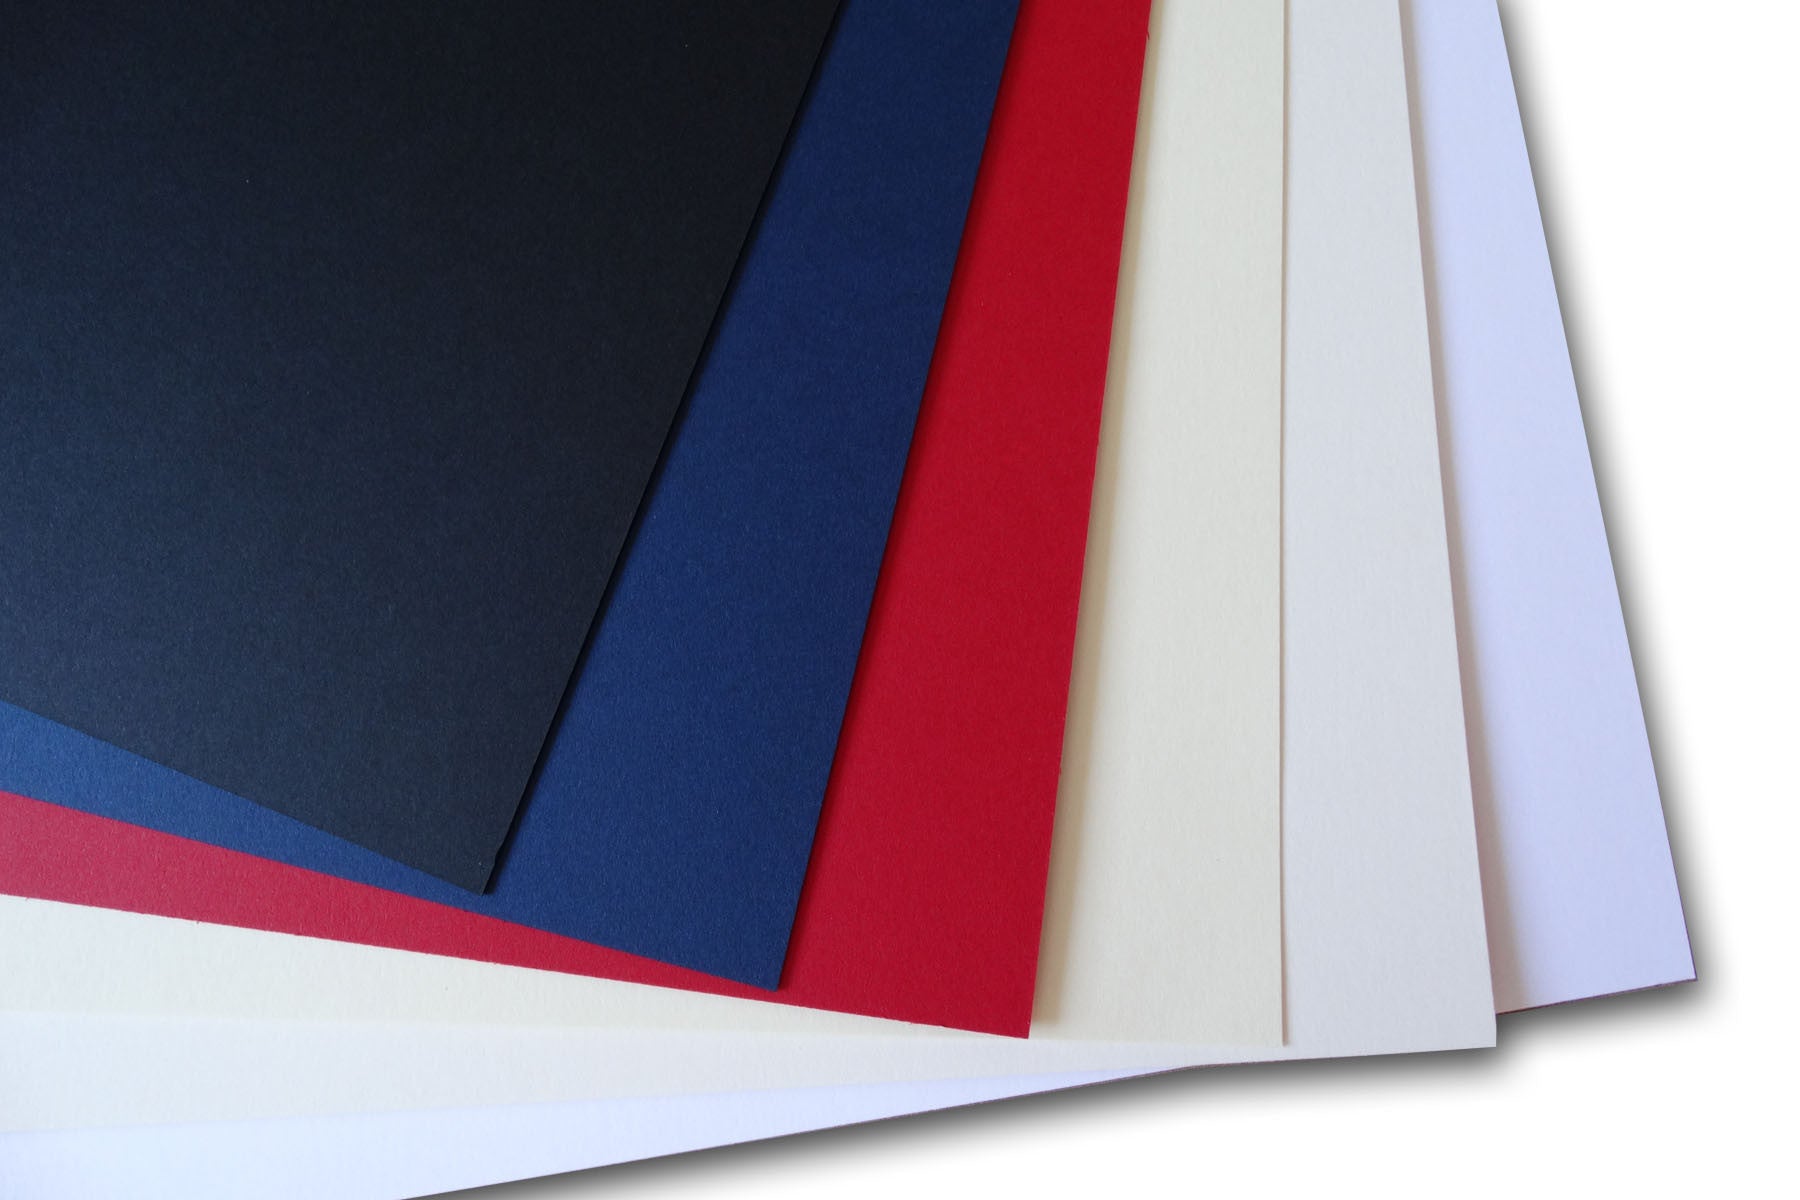 Double Thick Card Stock Paper